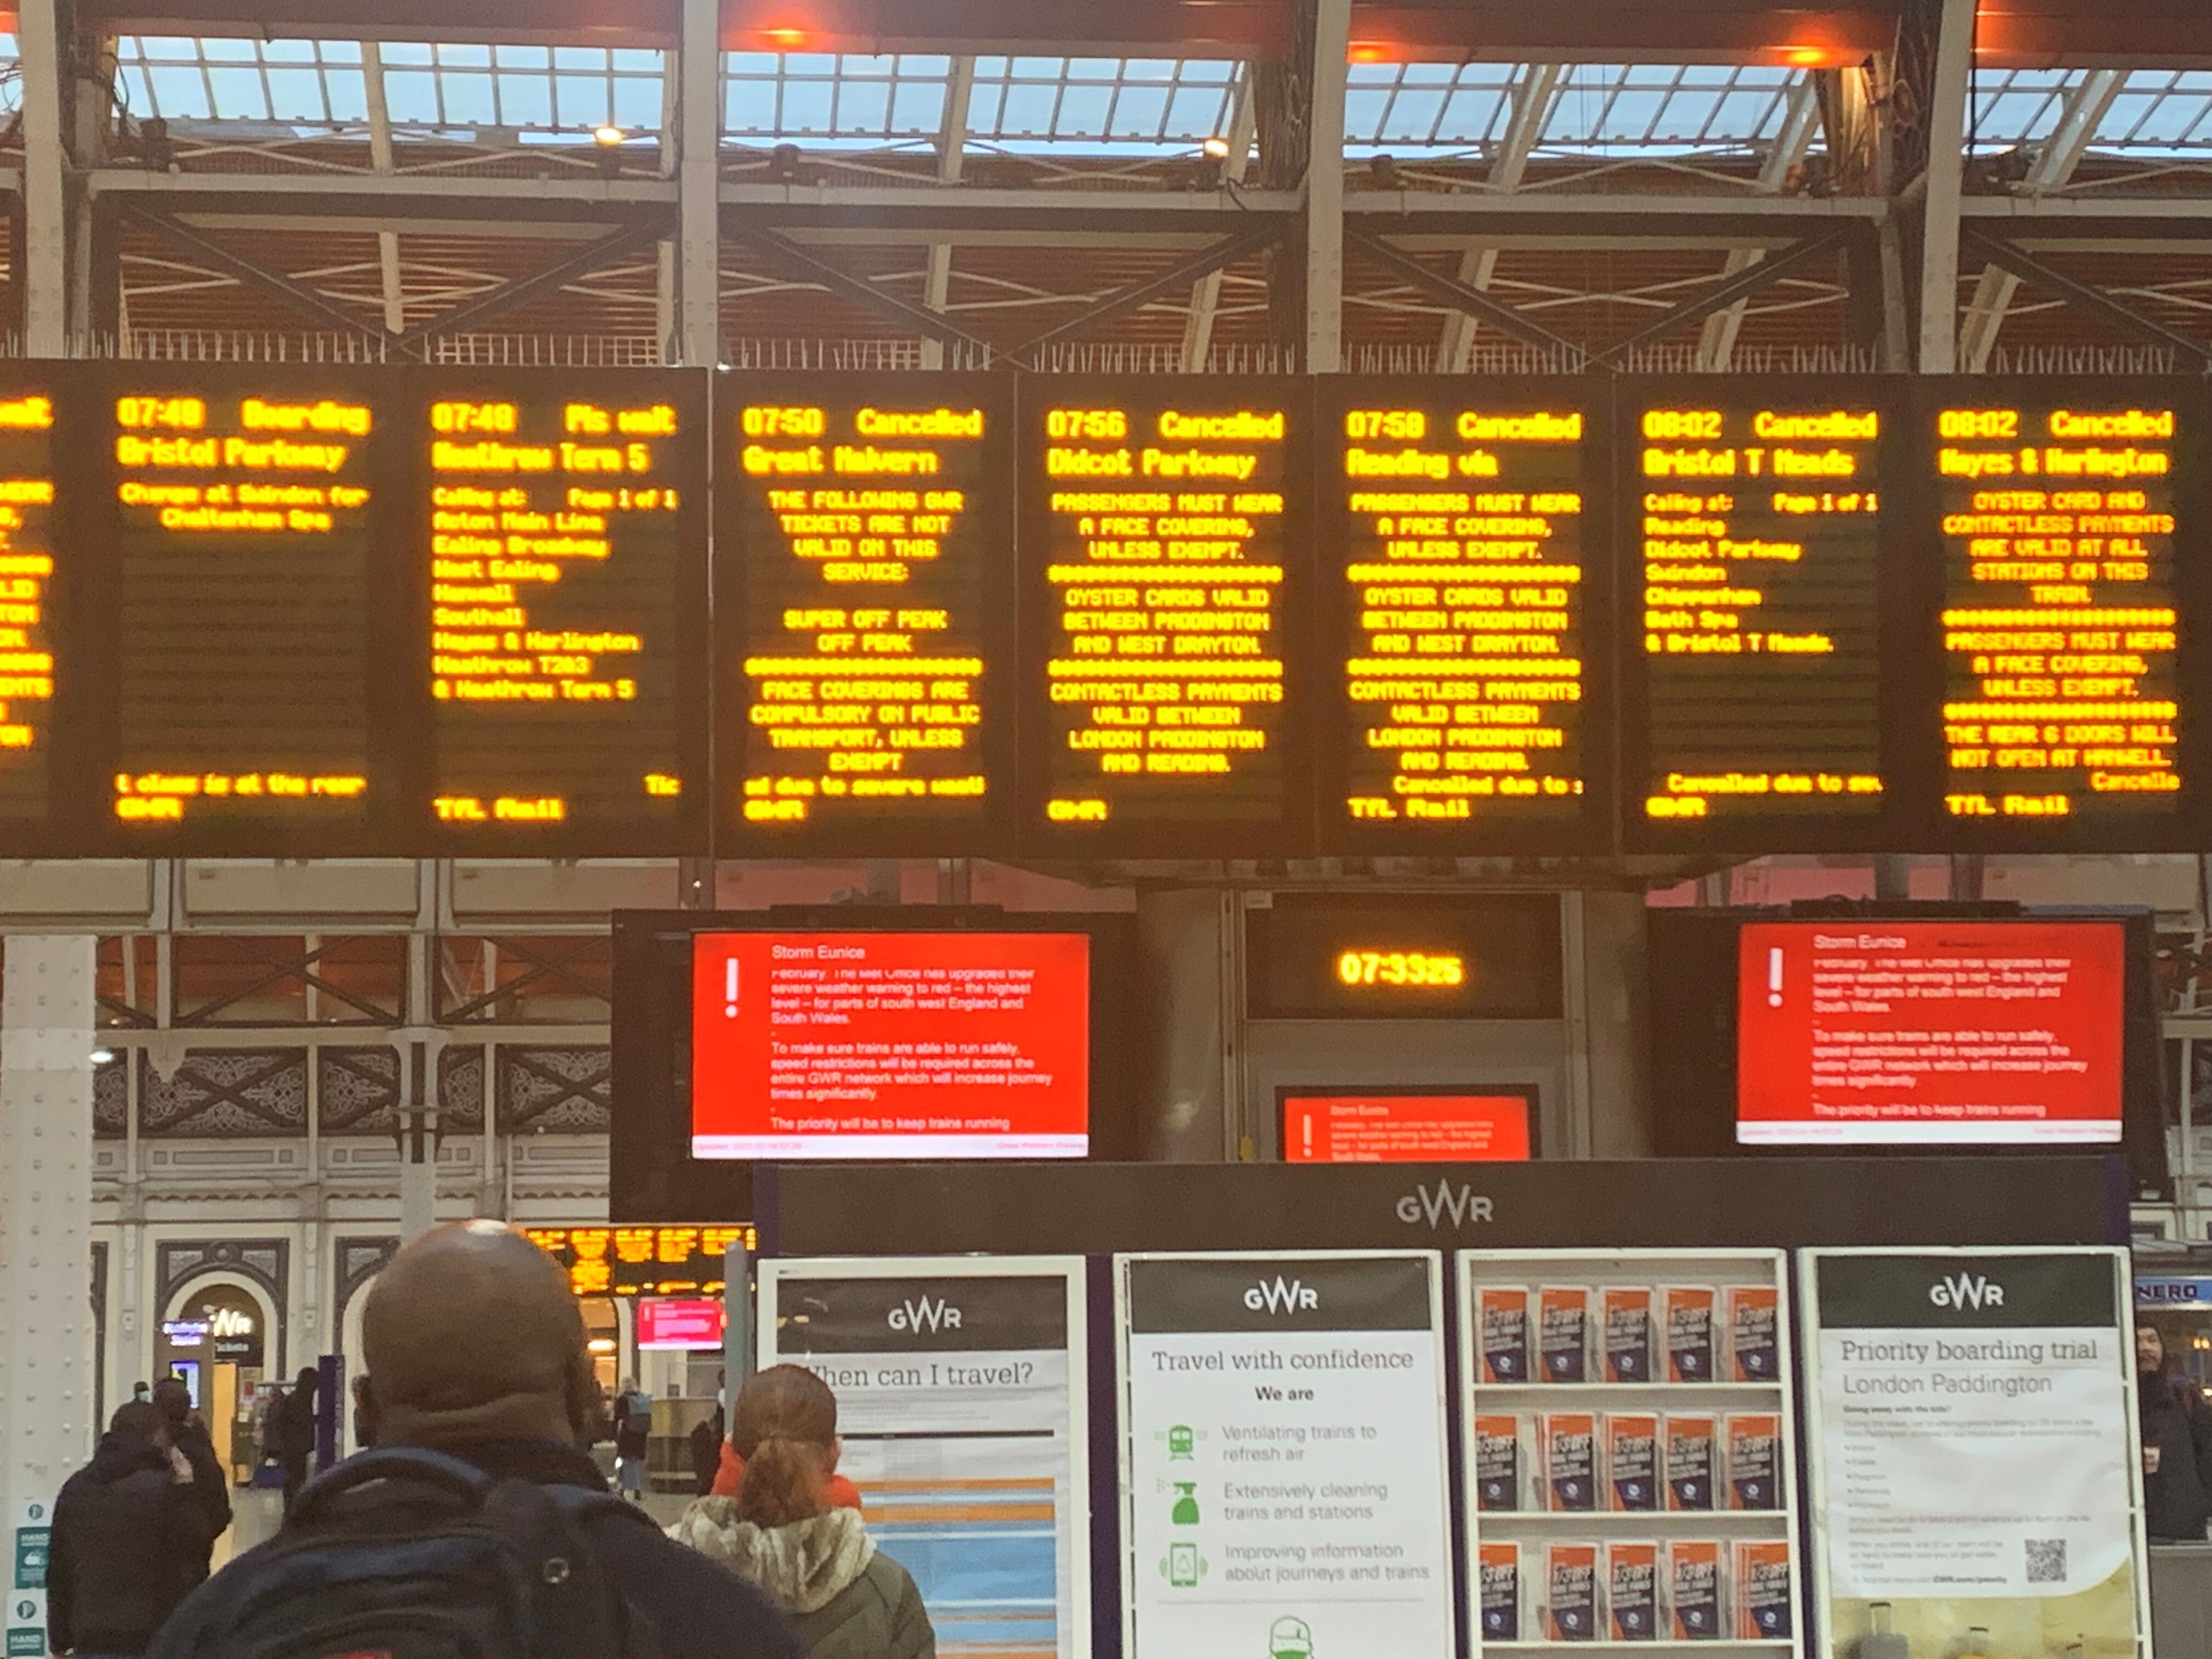 A sign at London’s Paddington station shows cancelled trains after Storm Eunice hit the south coast (Pete Clifton/PA)